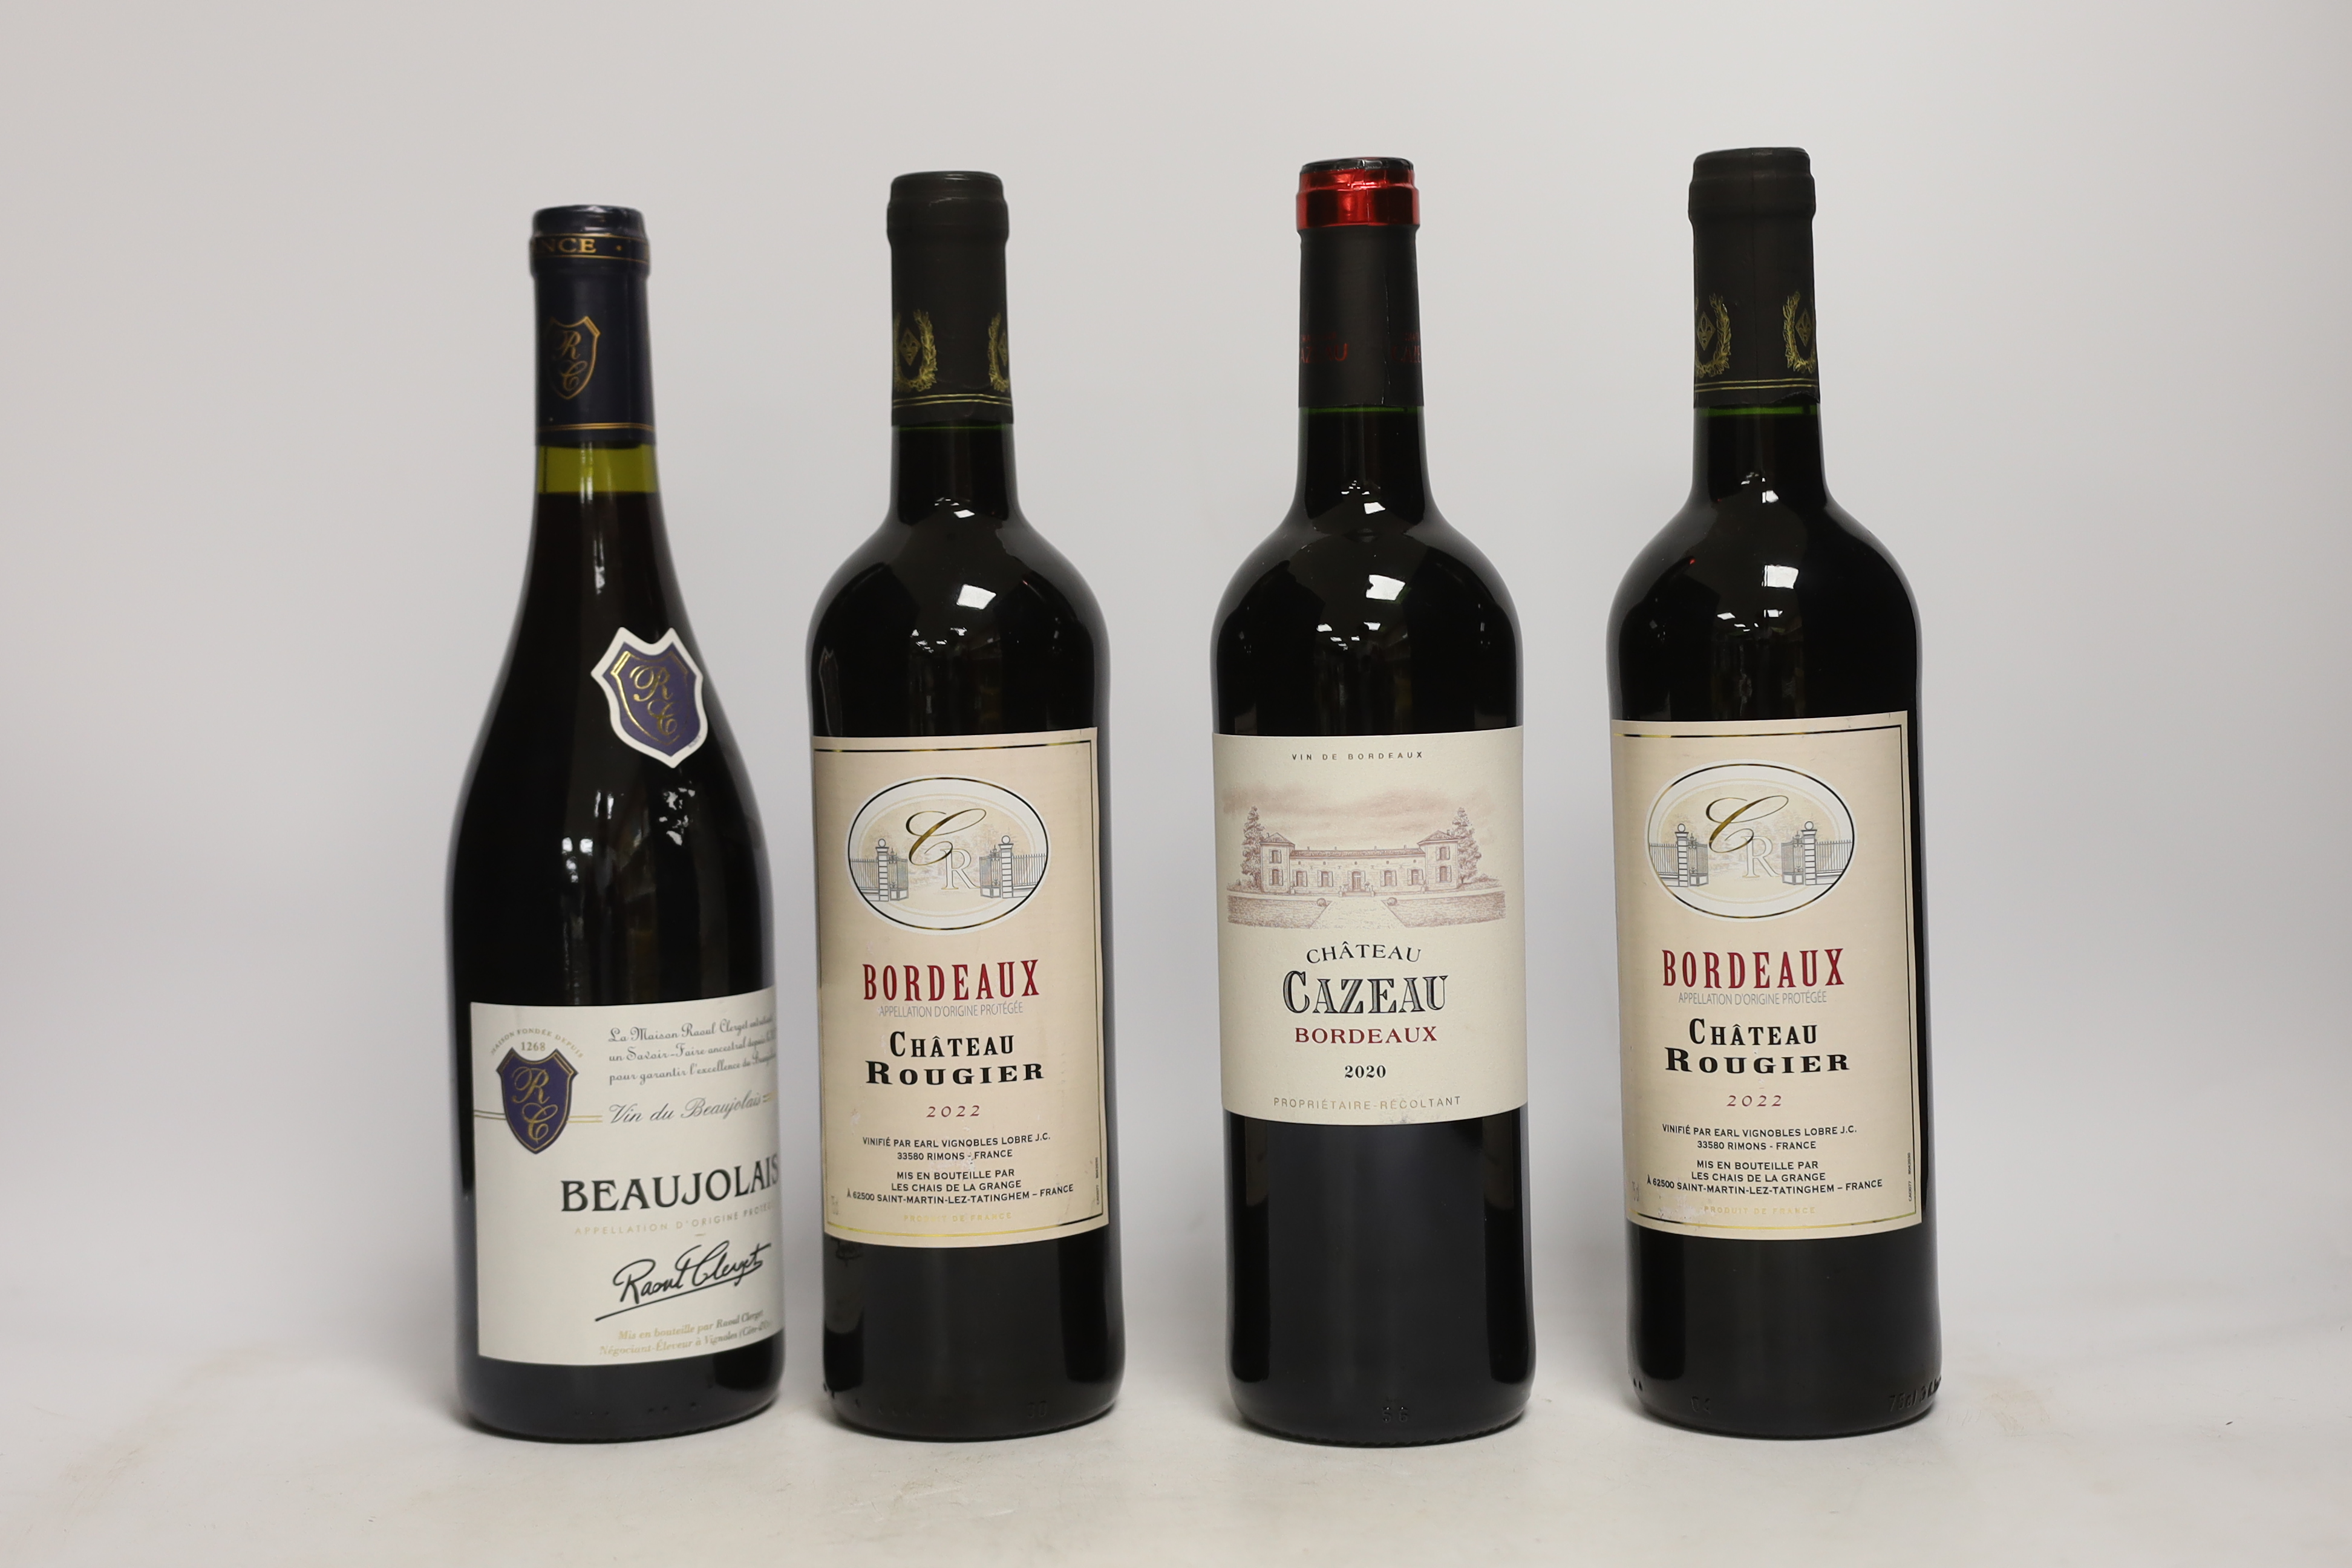 Eight bottles of wine including - three bottles of Moncade Bordeaux, two bottles of Chateau Rougier Bordeaux 2022, a bottle of Chateau Cazeau Bordeaux 2020, a bottle of Chateau Les Viviers Bordeaux Superieur and a bottle